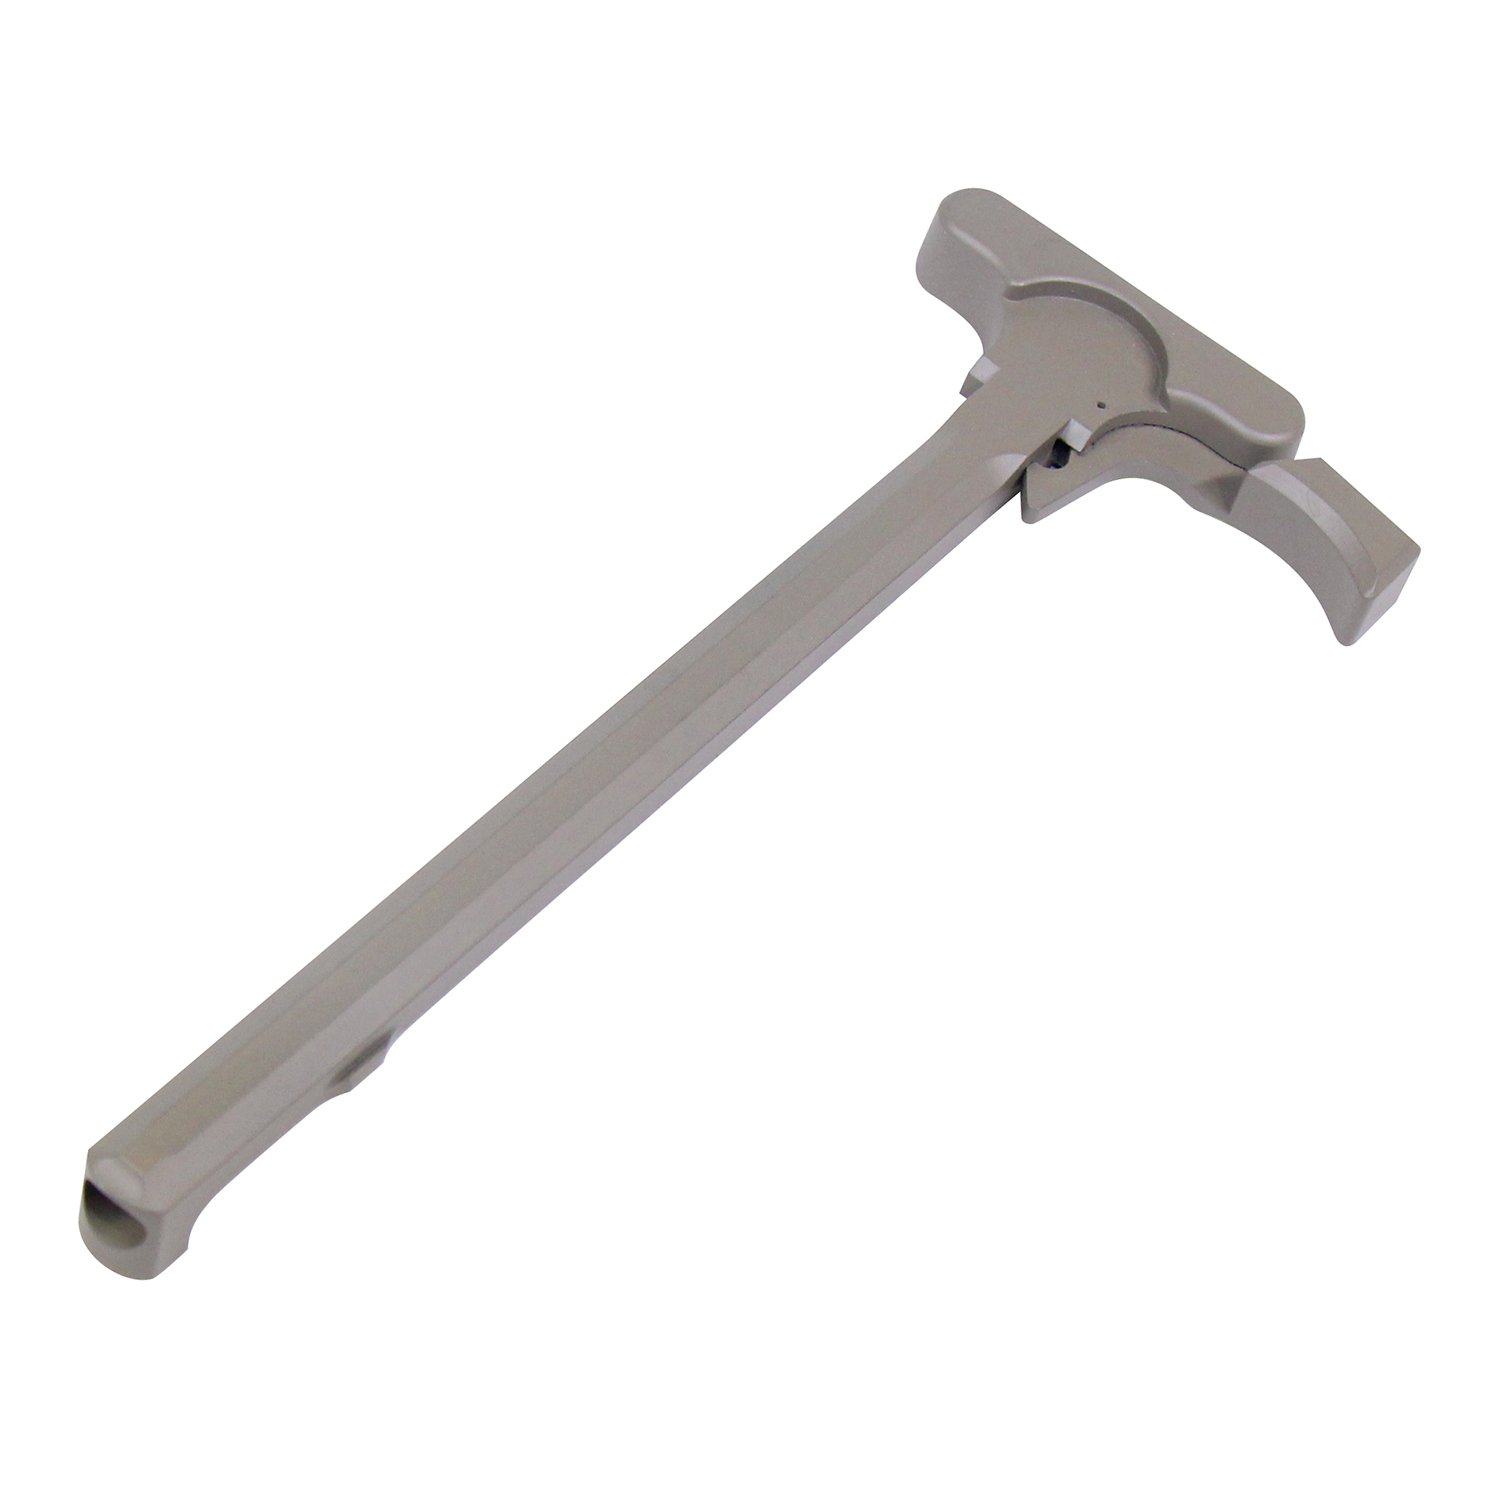 AR-15 Charging Handle with Gen 5 Latch in FDE